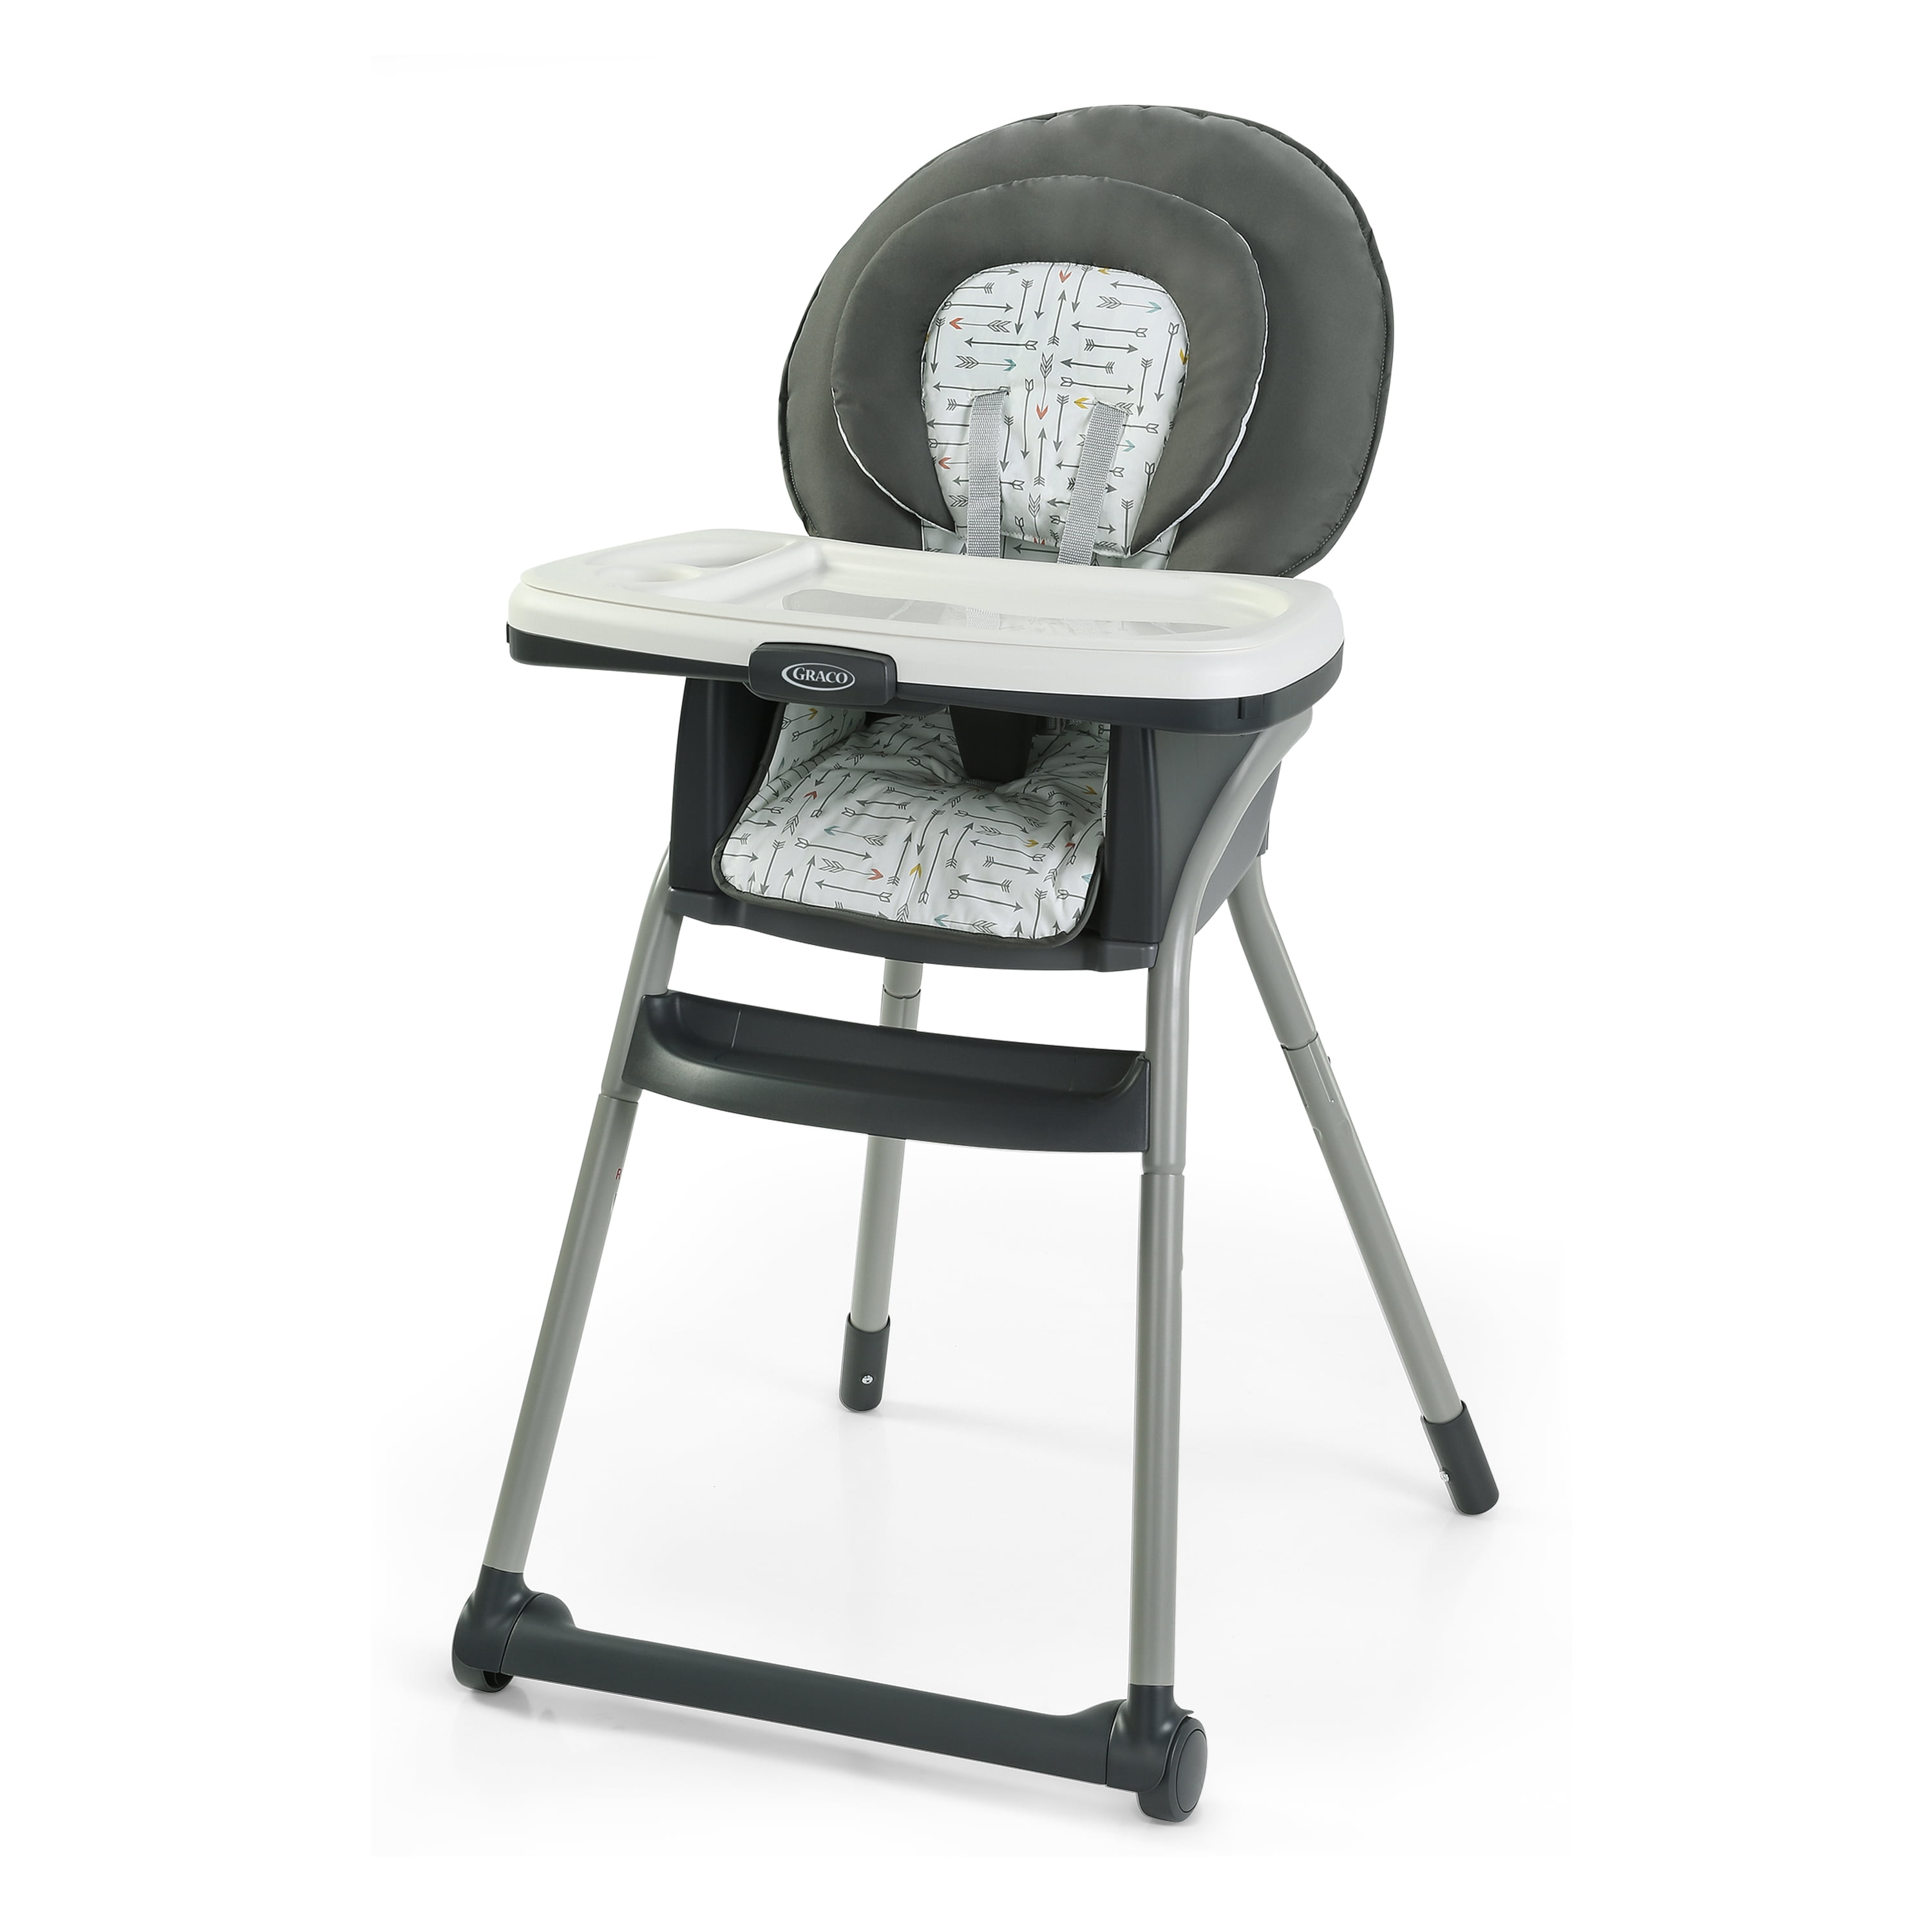 Graco Table2table Lx 6 In 1 Highchair, Graco Black Leather High Chair